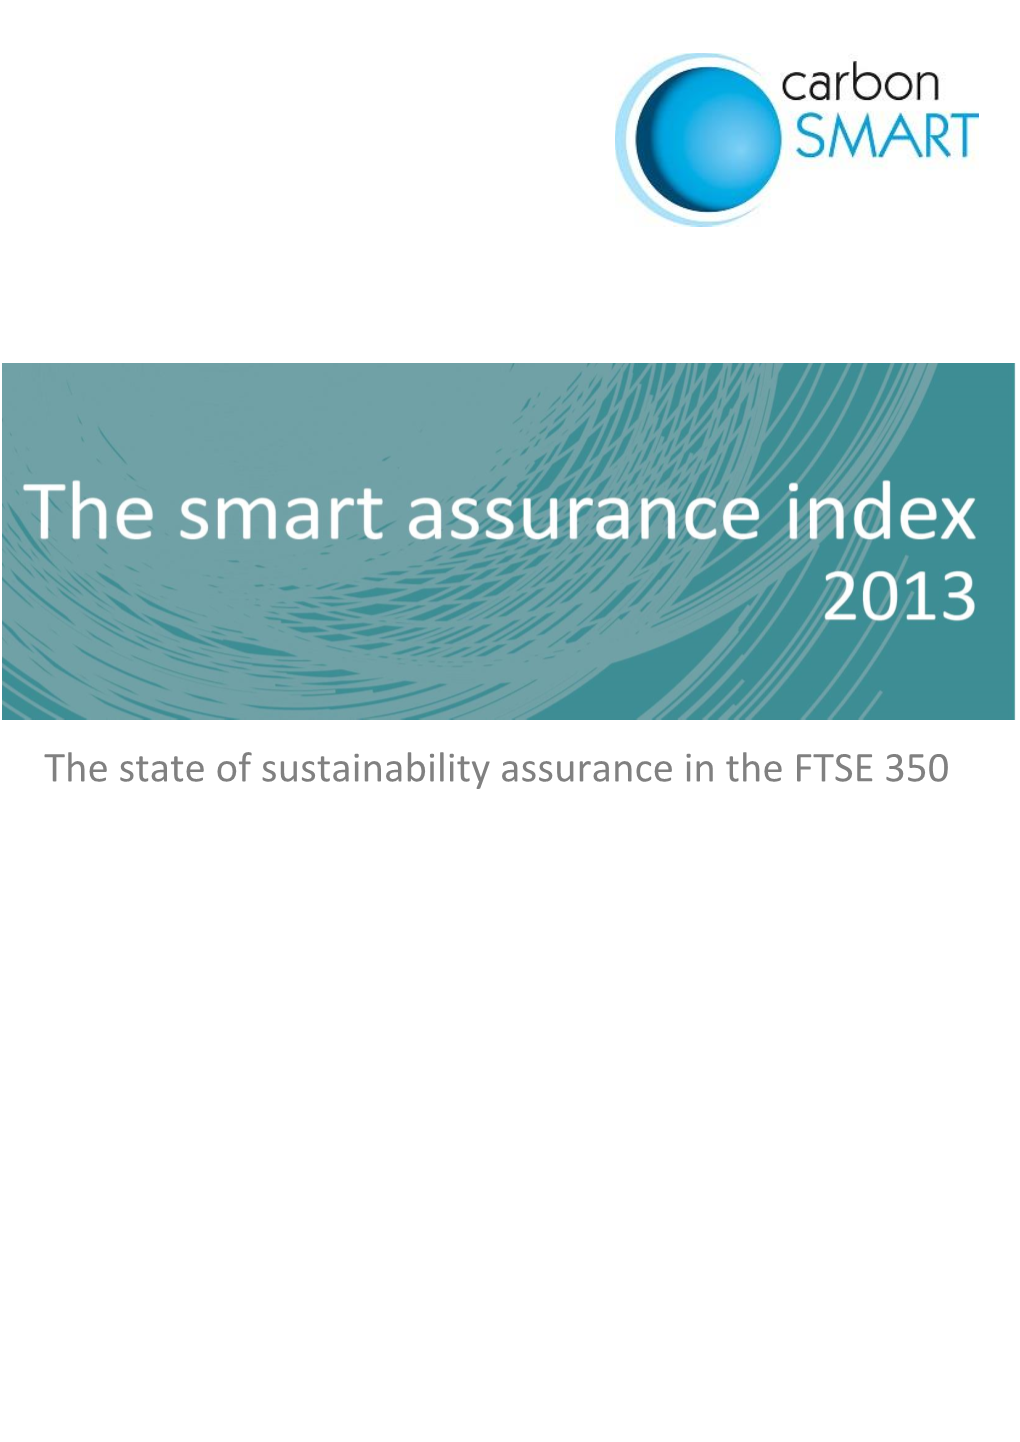 The State of Sustainability Assurance in the FTSE 350